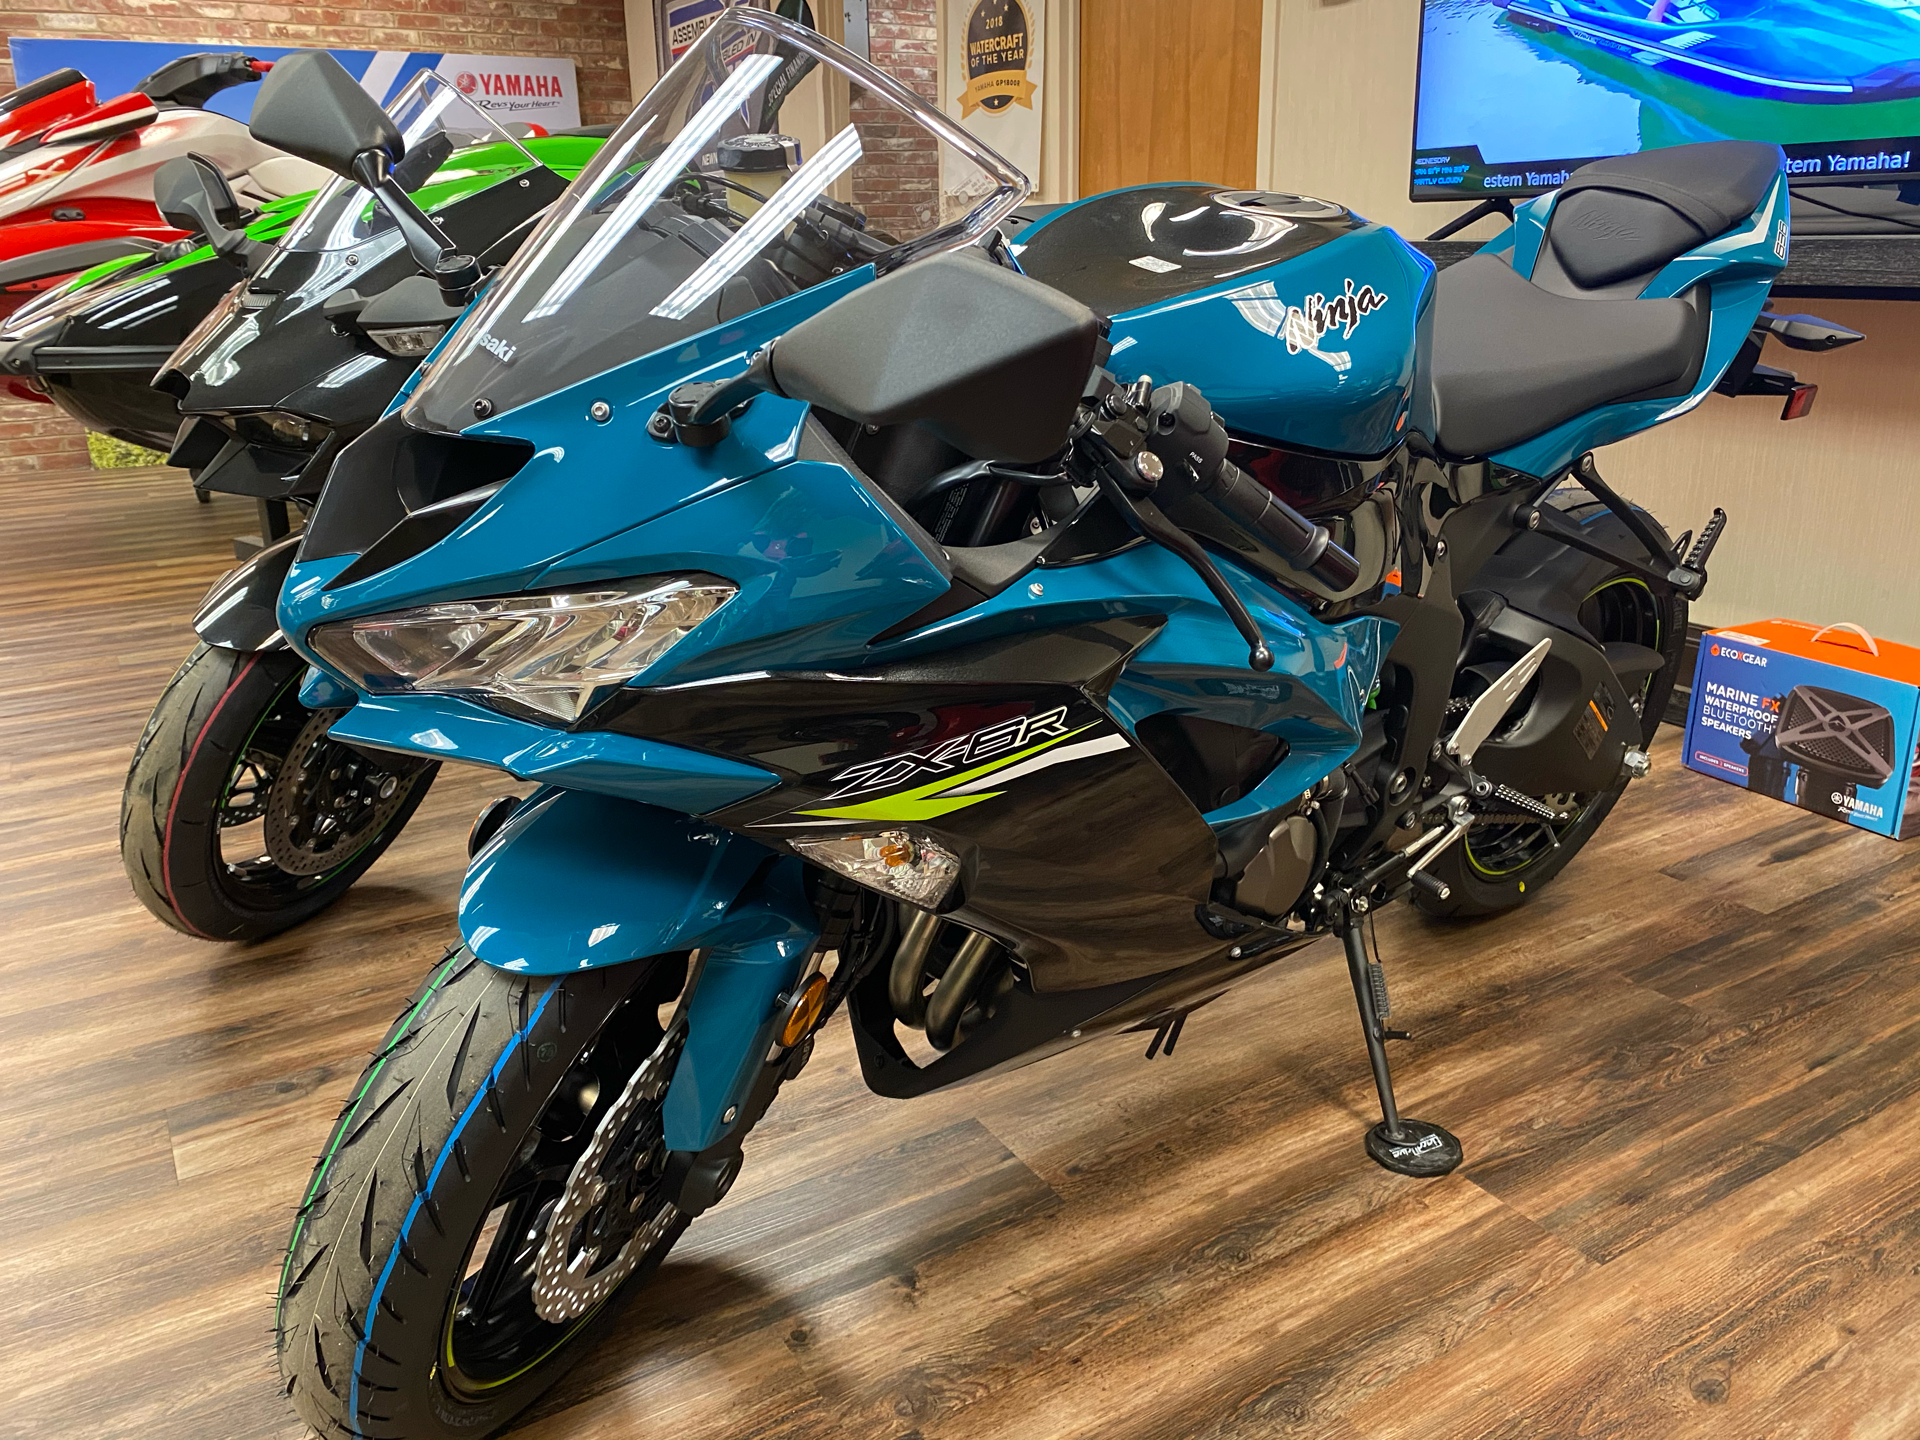 New 2021 Kawasaki Ninja ZX-6R Motorcycles in Statesville, Stock Number: 007484 - greatwesternmotorcycles.com